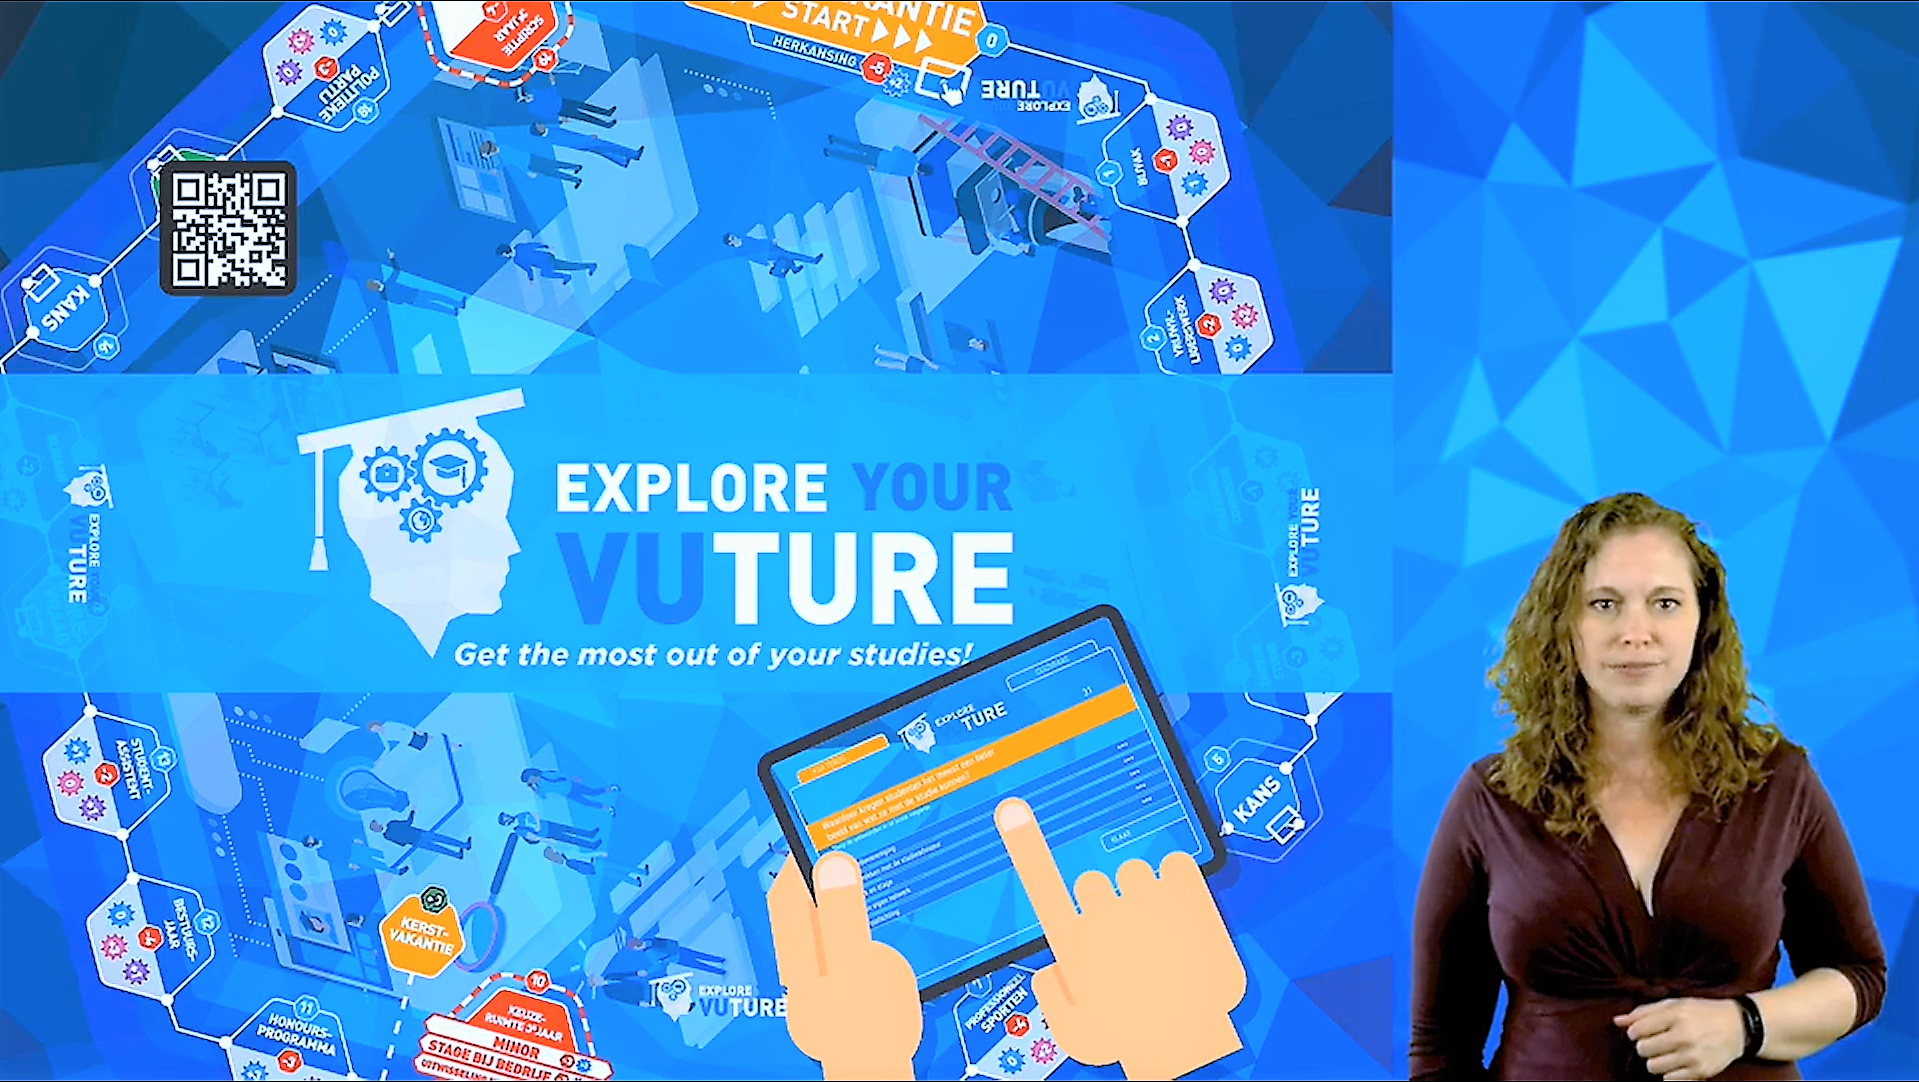 Video still: Nadia in front of the Explore Your VUture game board, explaining the game rules